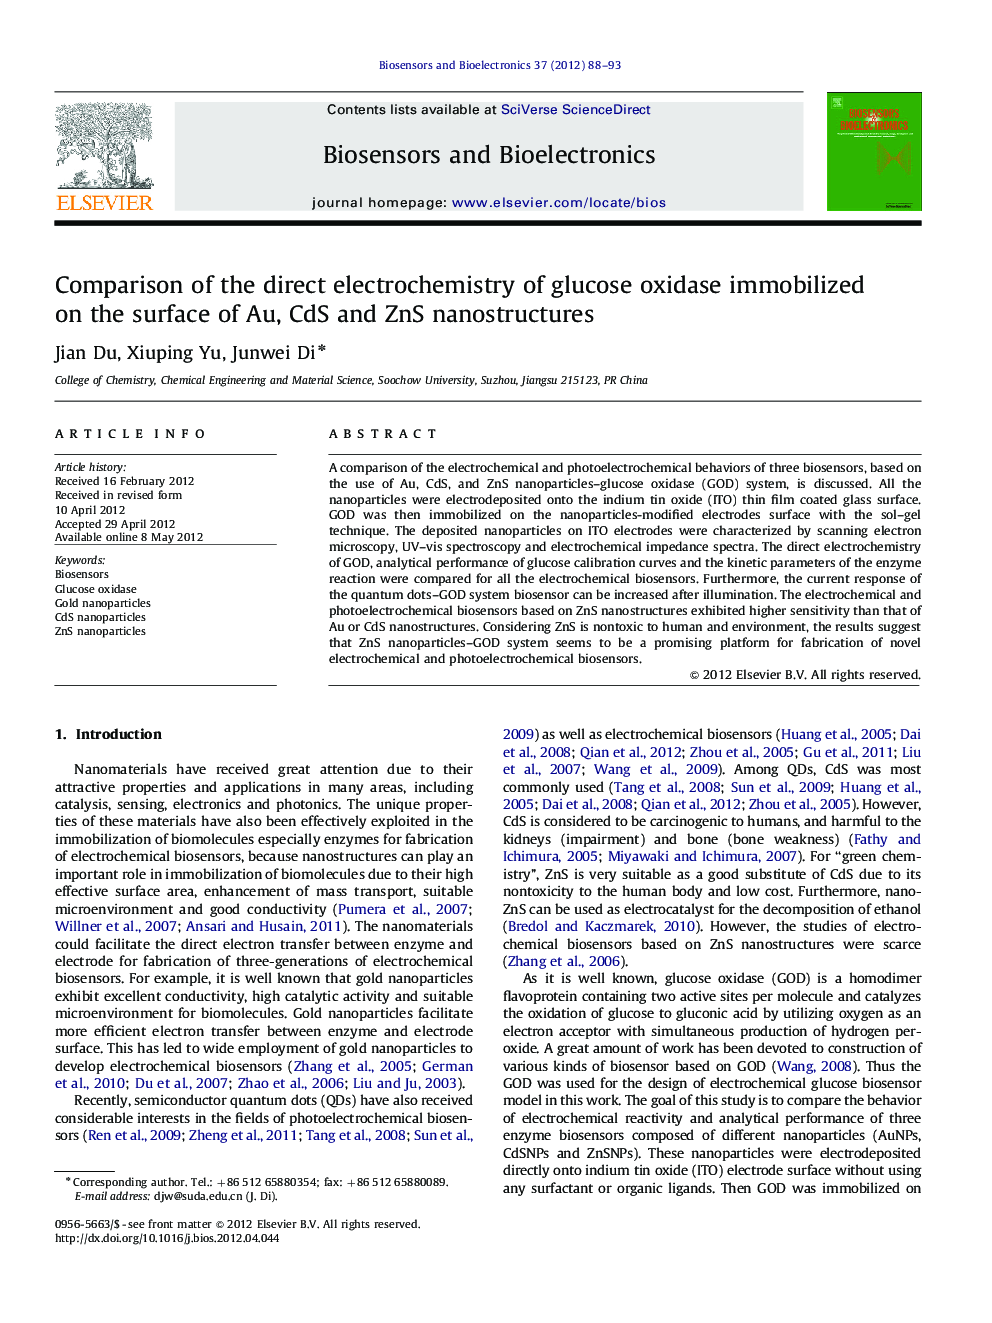 Comparison of the direct electrochemistry of glucose oxidase immobilized on the surface of Au, CdS and ZnS nanostructures